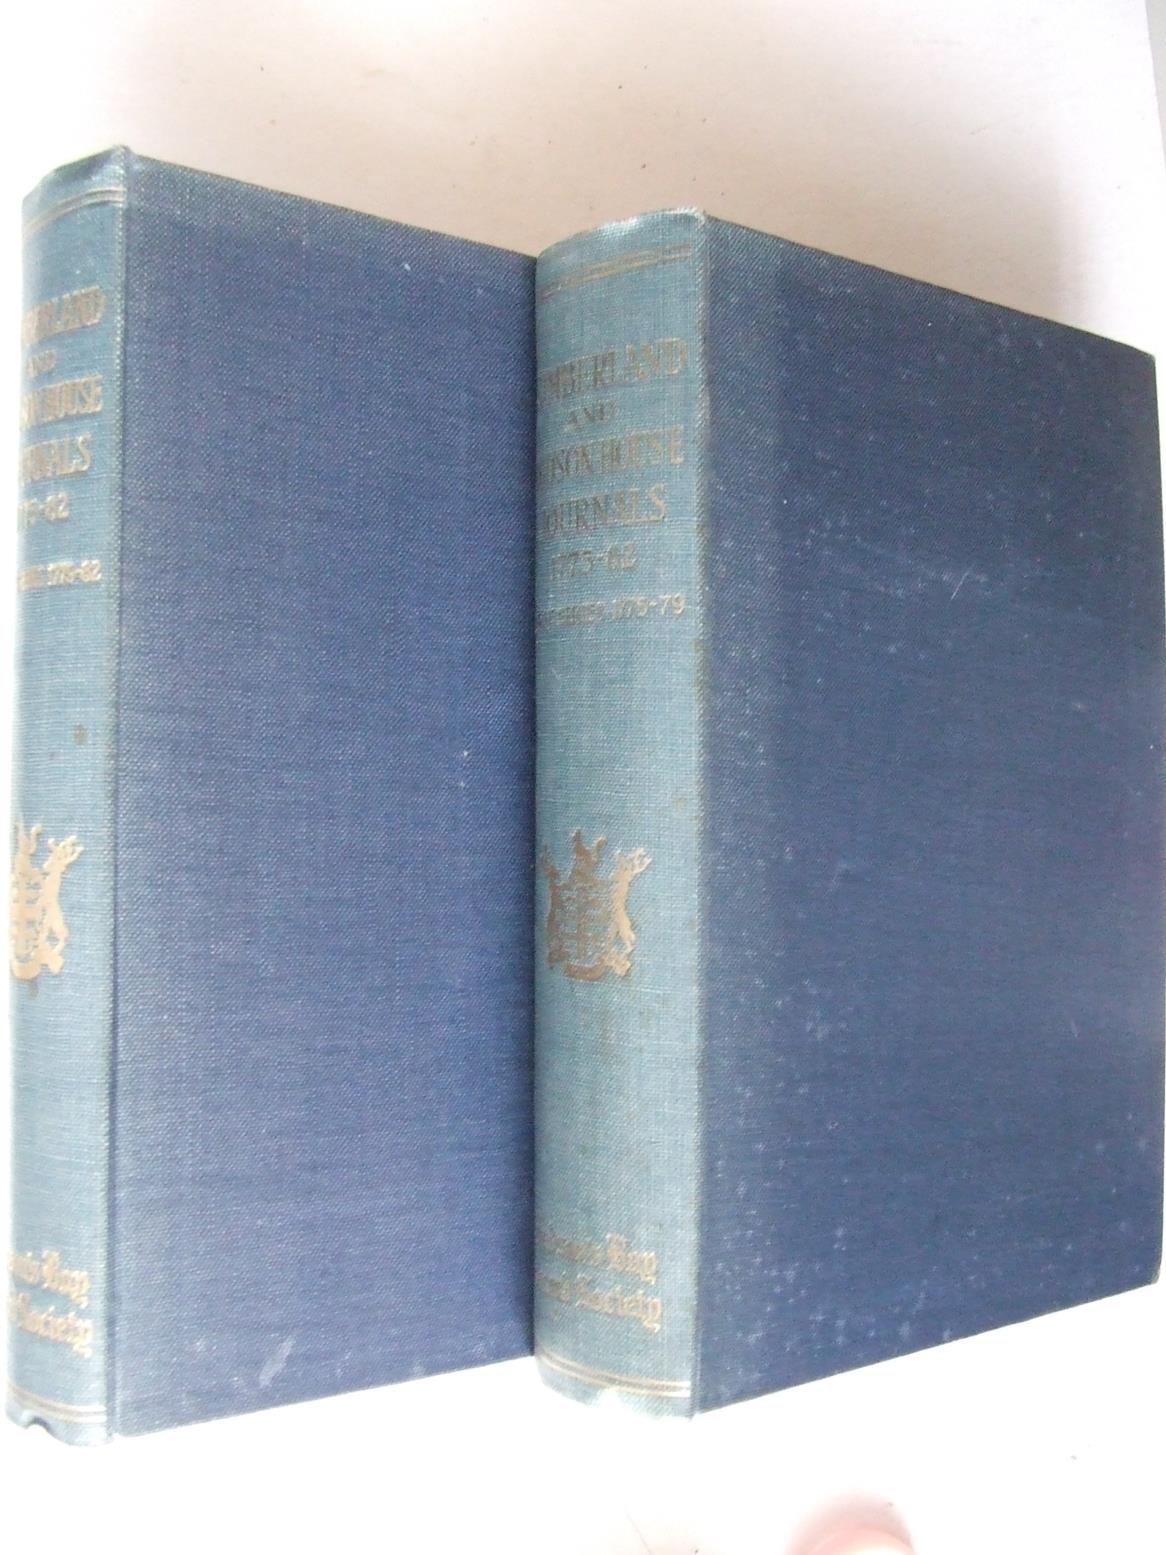 Cumberland House Journals and Inland Journal 1775-82. first and second series